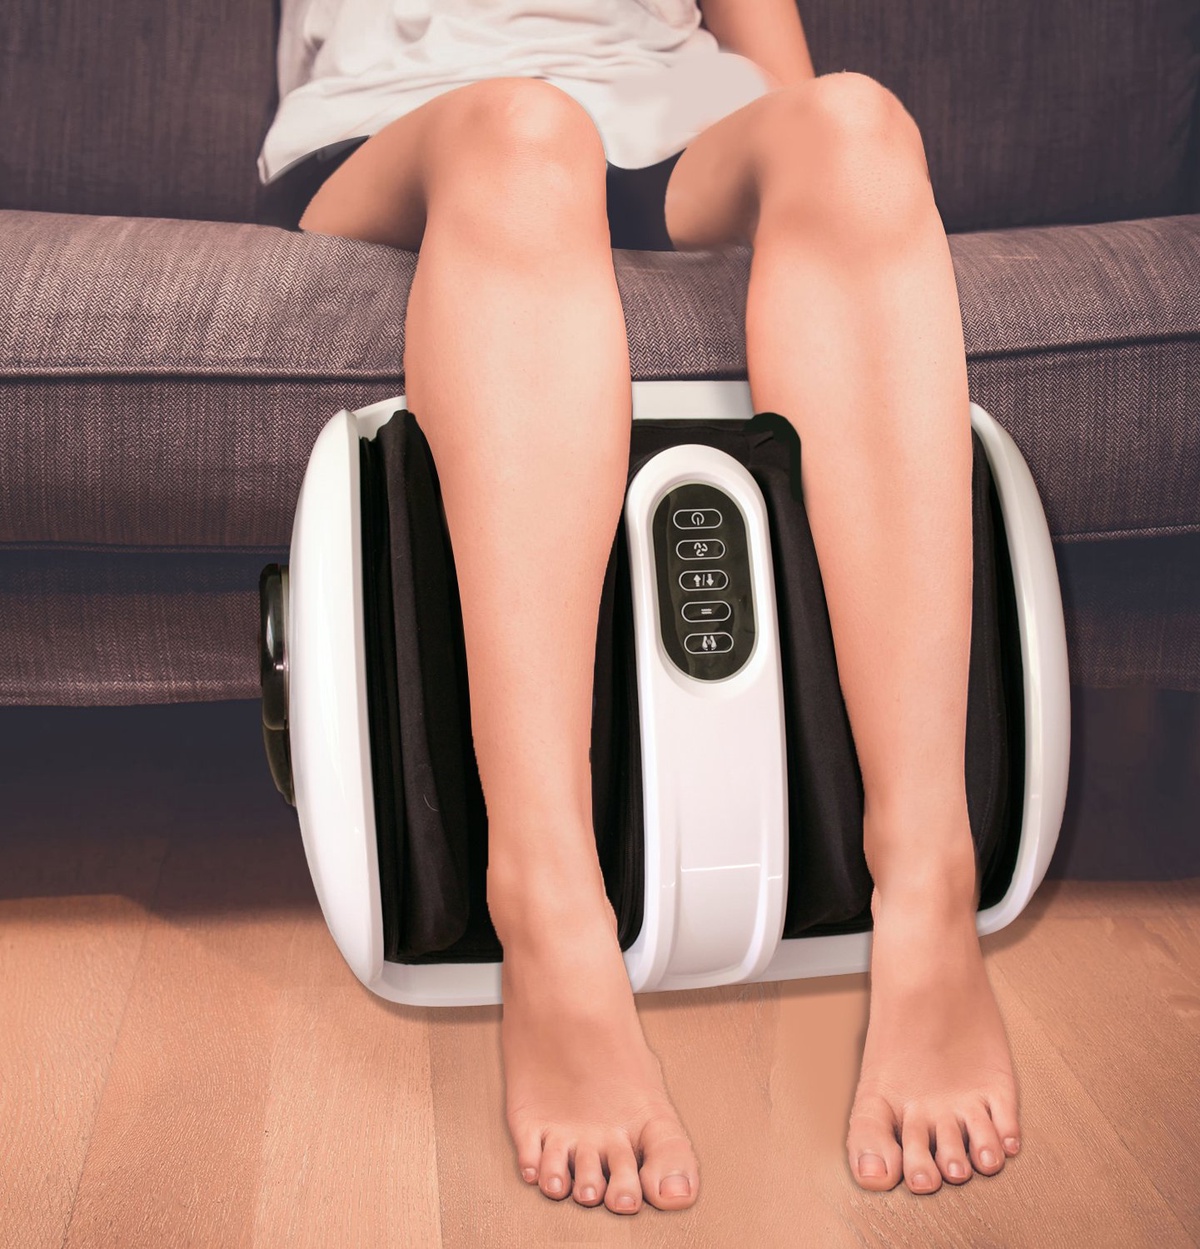 Can leg massage machines help with specific health conditions?